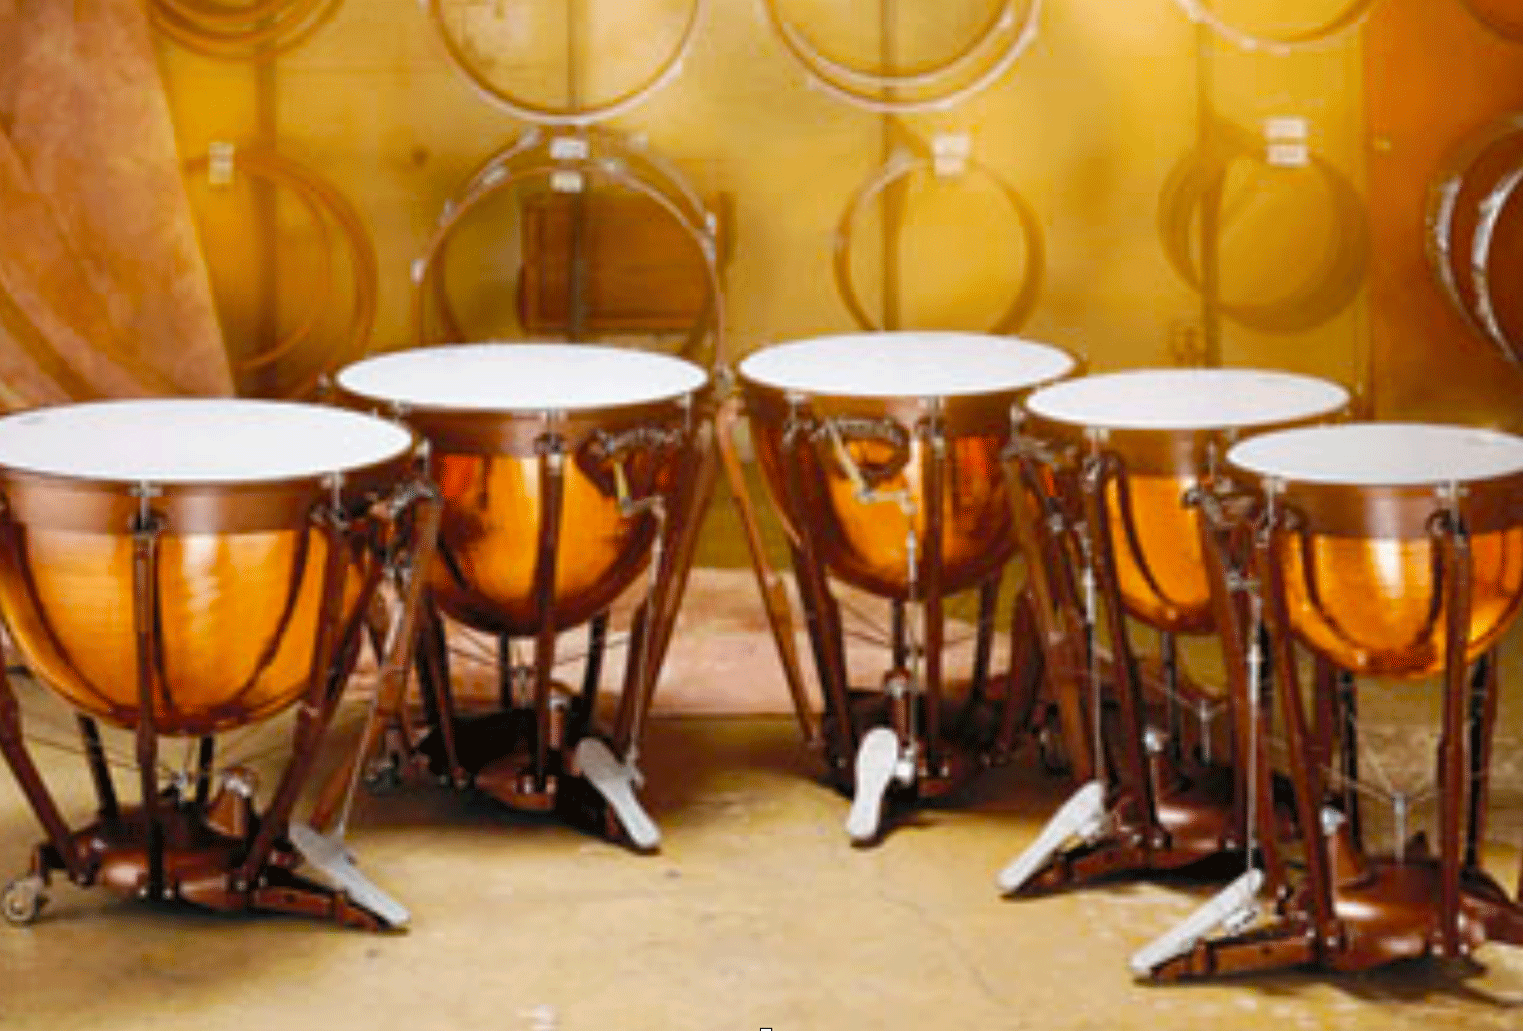 Exploring the History of Playing Timpani (Kettle Drums) | Making Music